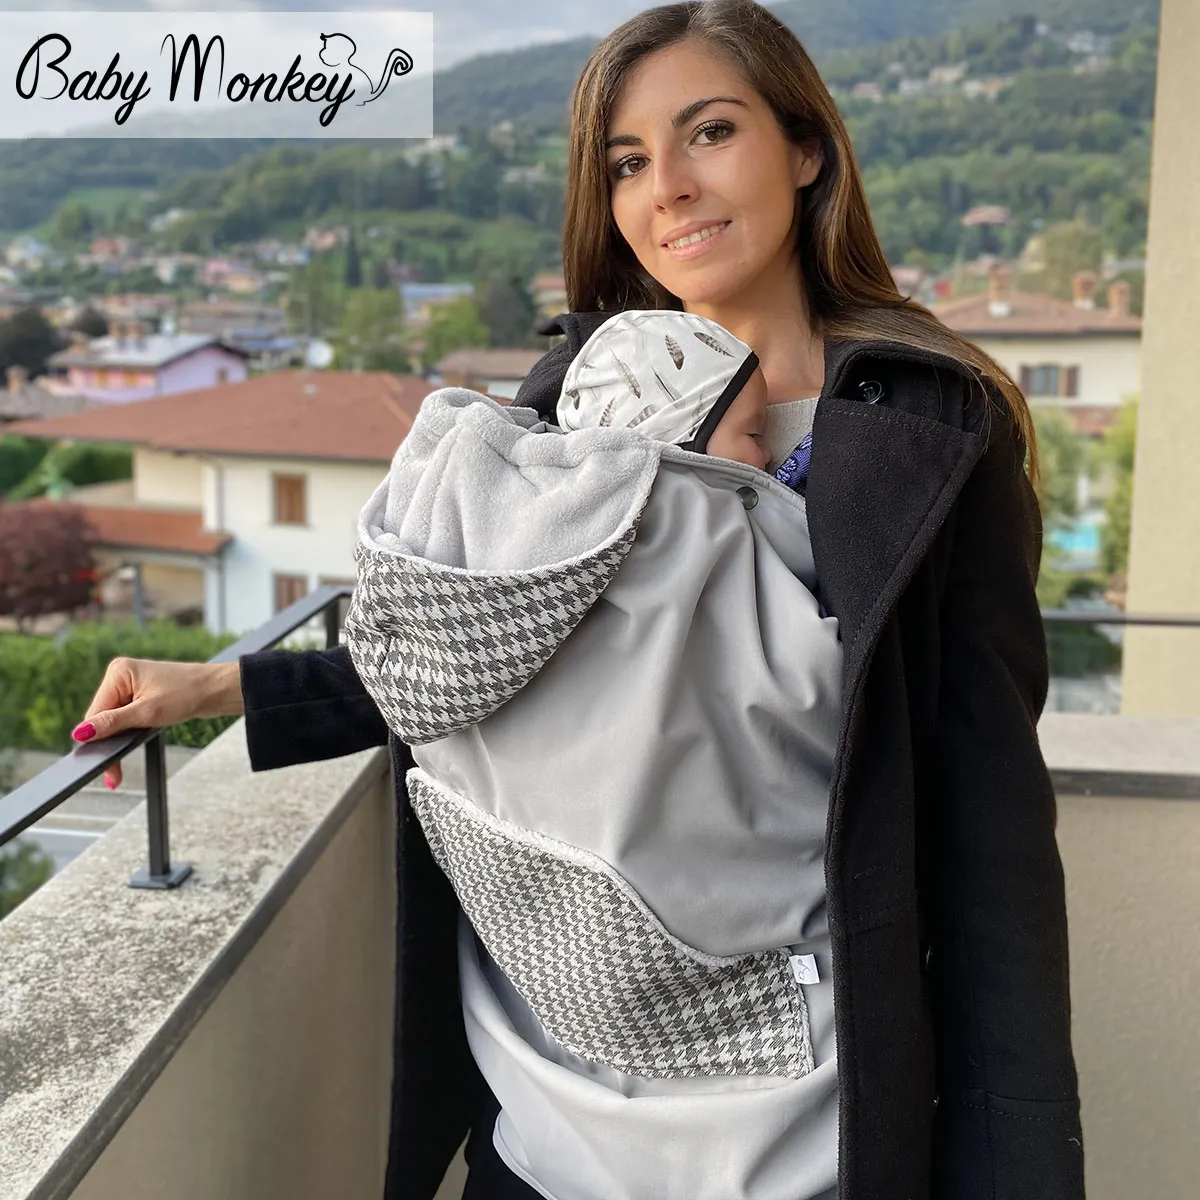 Baby Carrier Cover - grey